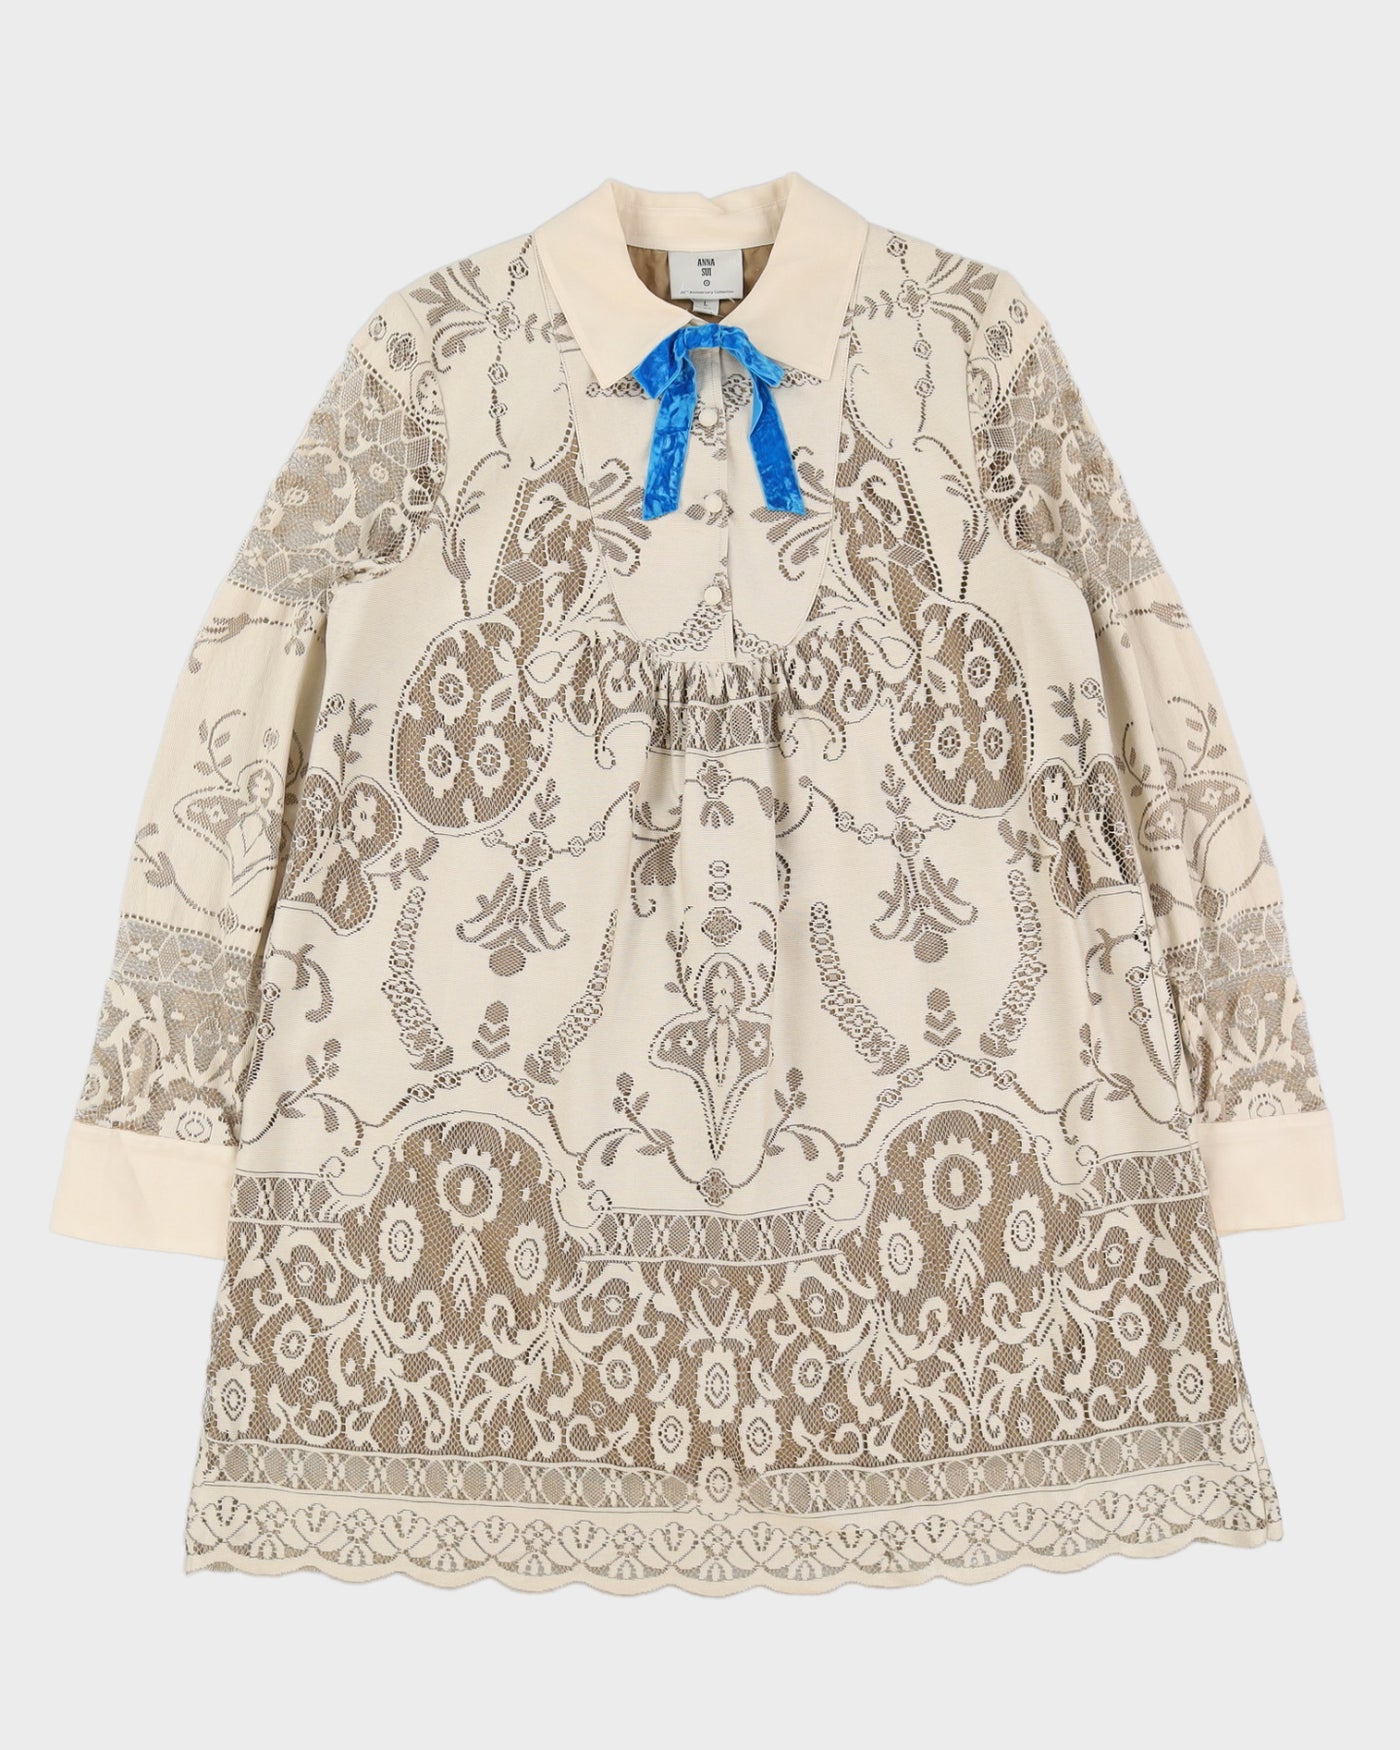 Anna Sui 20th Anniversary Collection Lace Dress - S